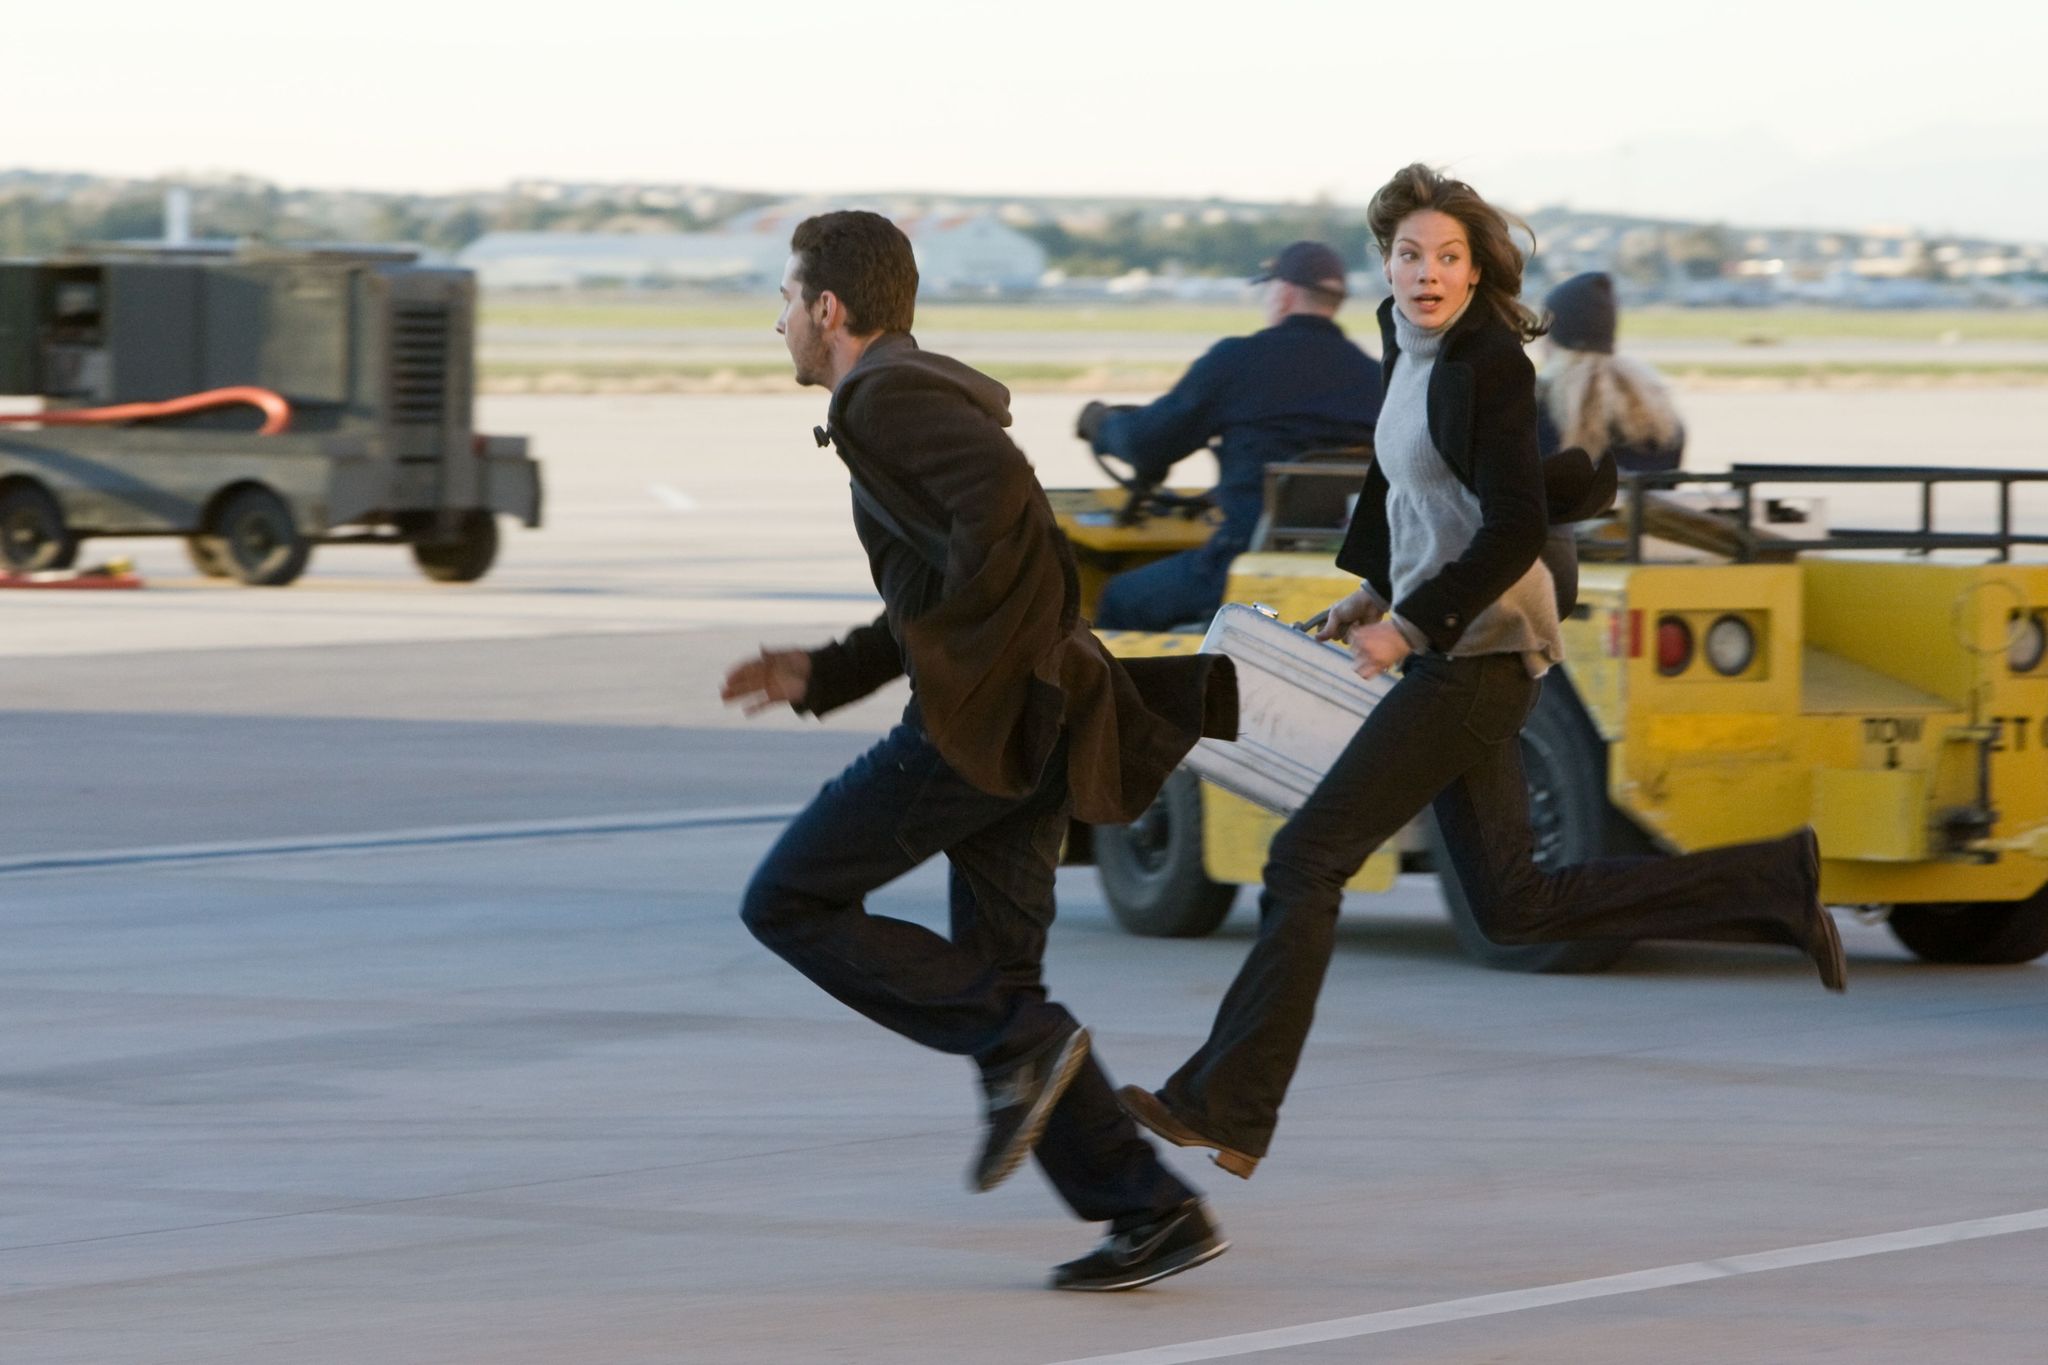 Still of Shia LaBeouf and Michelle Monaghan in Eagle Eye (2008)